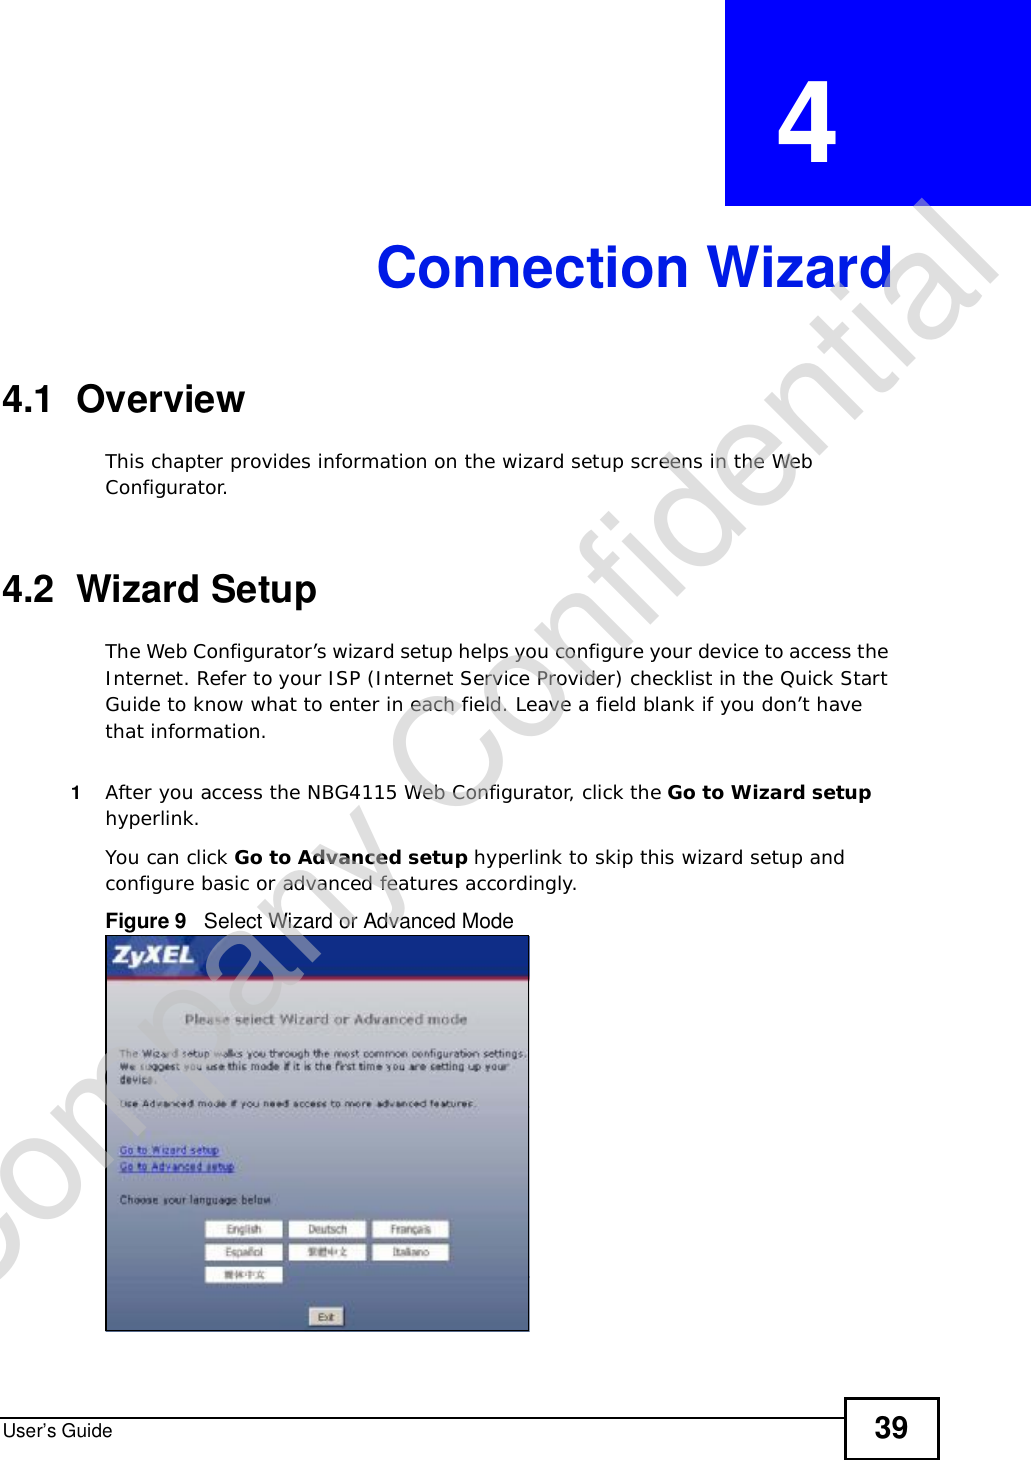 User’s Guide 39CHAPTER  4 Connection Wizard4.1  OverviewThis chapter provides information on the wizard setup screens in the Web Configurator.4.2  Wizard SetupThe Web Configurator’s wizard setup helps you configure your device to access the Internet. Refer to your ISP (Internet Service Provider) checklist in the Quick Start Guide to know what to enter in each field. Leave a field blank if you don’t have that information.1After you access the NBG4115 Web Configurator, click the Go to Wizard setuphyperlink.You can click Go to Advanced setup hyperlink to skip this wizard setup and configure basic or advanced features accordingly.Figure 9   Select Wizard or Advanced ModeCompany Confidential